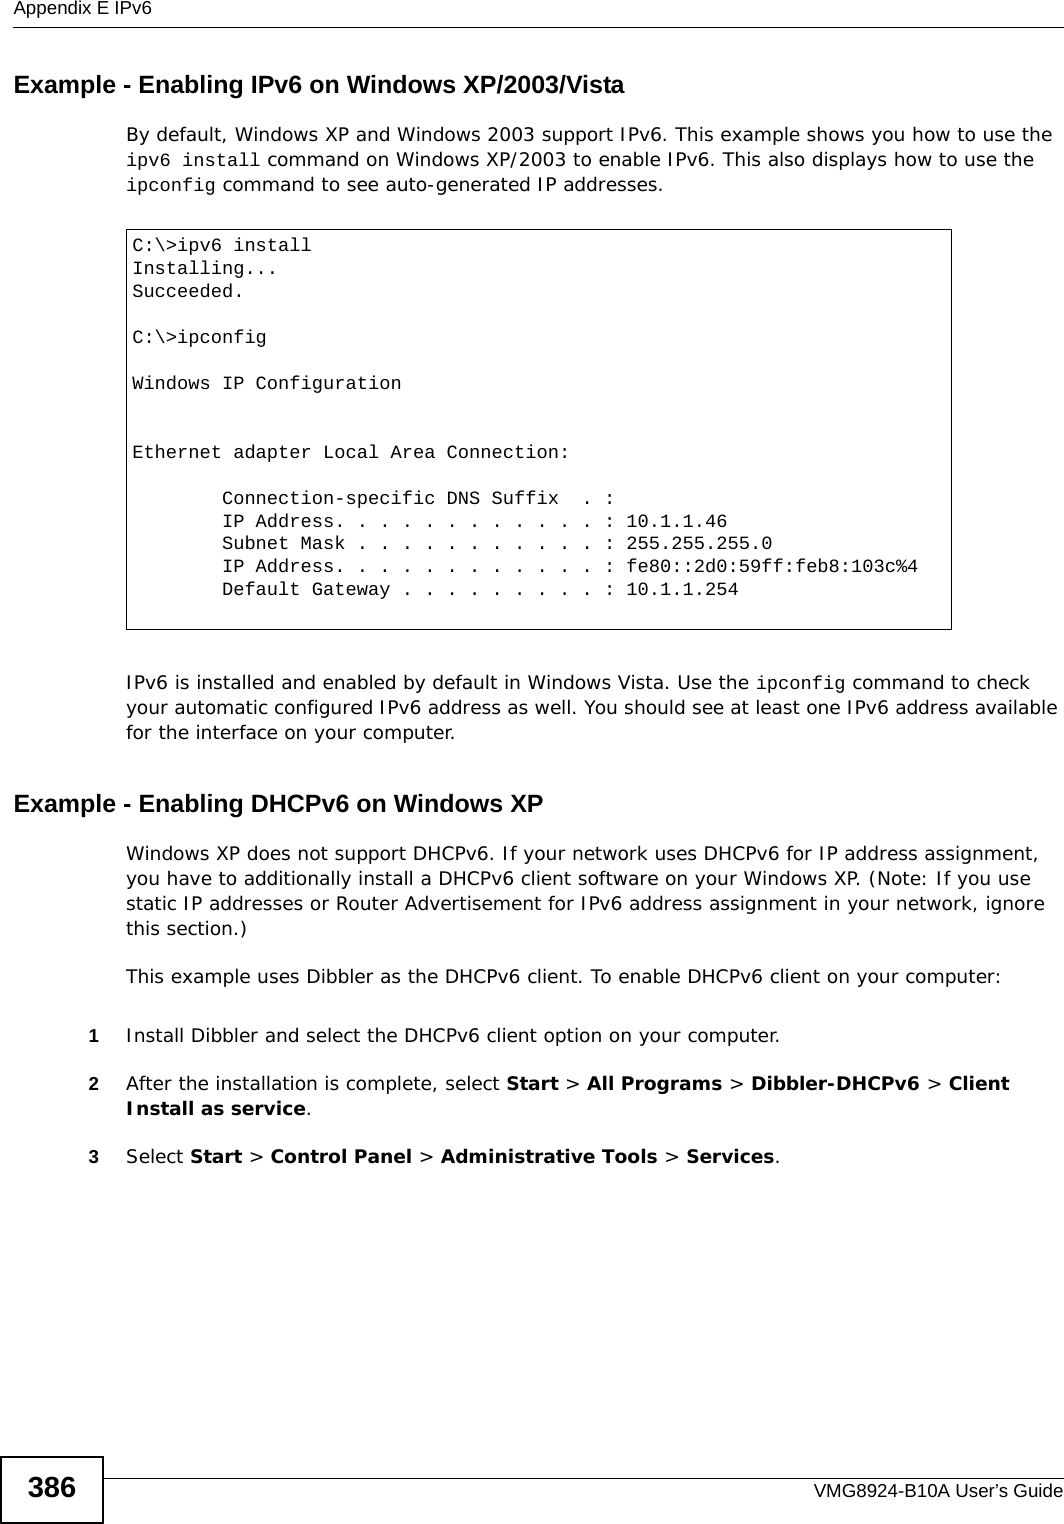 Appendix E IPv6VMG8924-B10A User’s Guide386Example - Enabling IPv6 on Windows XP/2003/VistaBy default, Windows XP and Windows 2003 support IPv6. This example shows you how to use the ipv6 install command on Windows XP/2003 to enable IPv6. This also displays how to use the ipconfig command to see auto-generated IP addresses.IPv6 is installed and enabled by default in Windows Vista. Use the ipconfig command to check your automatic configured IPv6 address as well. You should see at least one IPv6 address available for the interface on your computer.Example - Enabling DHCPv6 on Windows XPWindows XP does not support DHCPv6. If your network uses DHCPv6 for IP address assignment, you have to additionally install a DHCPv6 client software on your Windows XP. (Note: If you use static IP addresses or Router Advertisement for IPv6 address assignment in your network, ignore this section.)This example uses Dibbler as the DHCPv6 client. To enable DHCPv6 client on your computer:1Install Dibbler and select the DHCPv6 client option on your computer.2After the installation is complete, select Start &gt; All Programs &gt; Dibbler-DHCPv6 &gt; Client Install as service.3Select Start &gt; Control Panel &gt; Administrative Tools &gt; Services.C:\&gt;ipv6 installInstalling...Succeeded.C:\&gt;ipconfigWindows IP ConfigurationEthernet adapter Local Area Connection:        Connection-specific DNS Suffix  . :         IP Address. . . . . . . . . . . . : 10.1.1.46        Subnet Mask . . . . . . . . . . . : 255.255.255.0        IP Address. . . . . . . . . . . . : fe80::2d0:59ff:feb8:103c%4        Default Gateway . . . . . . . . . : 10.1.1.254